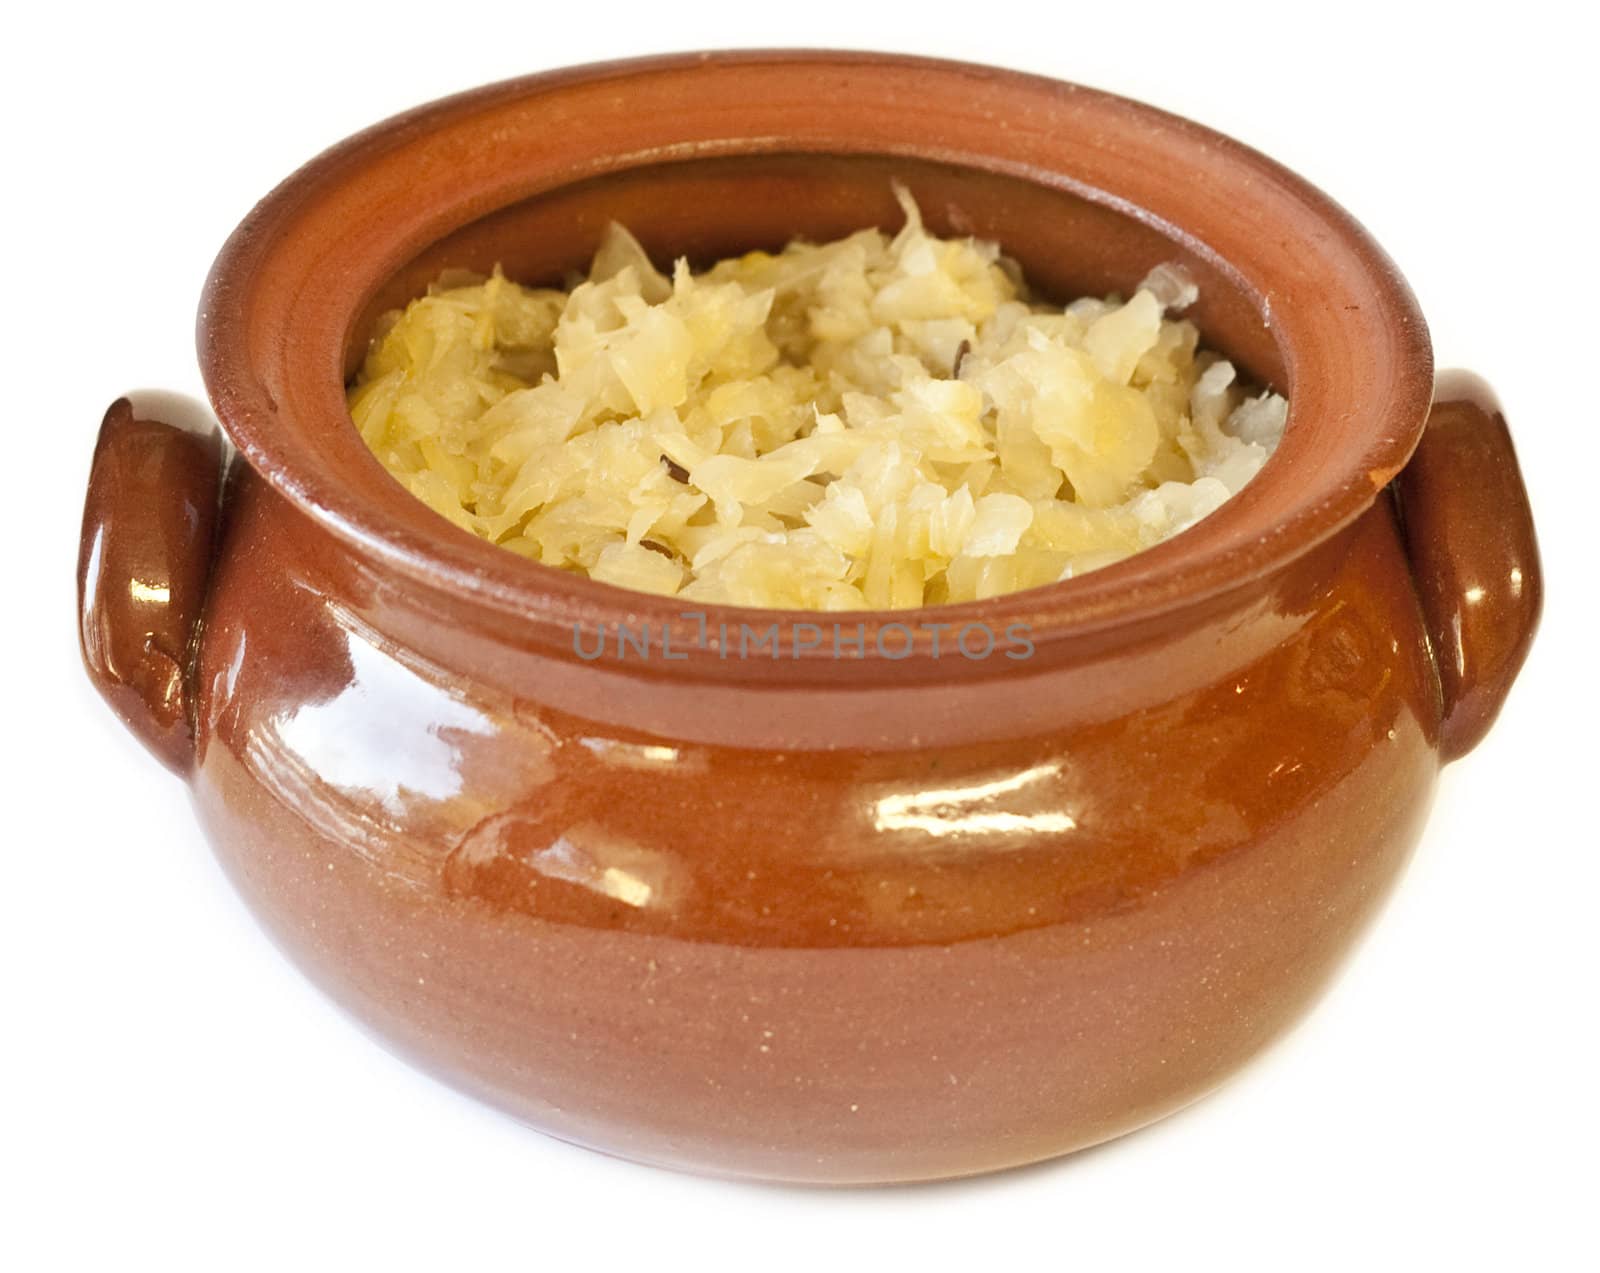 Clay pot filled with traditional homemade sauerkraut